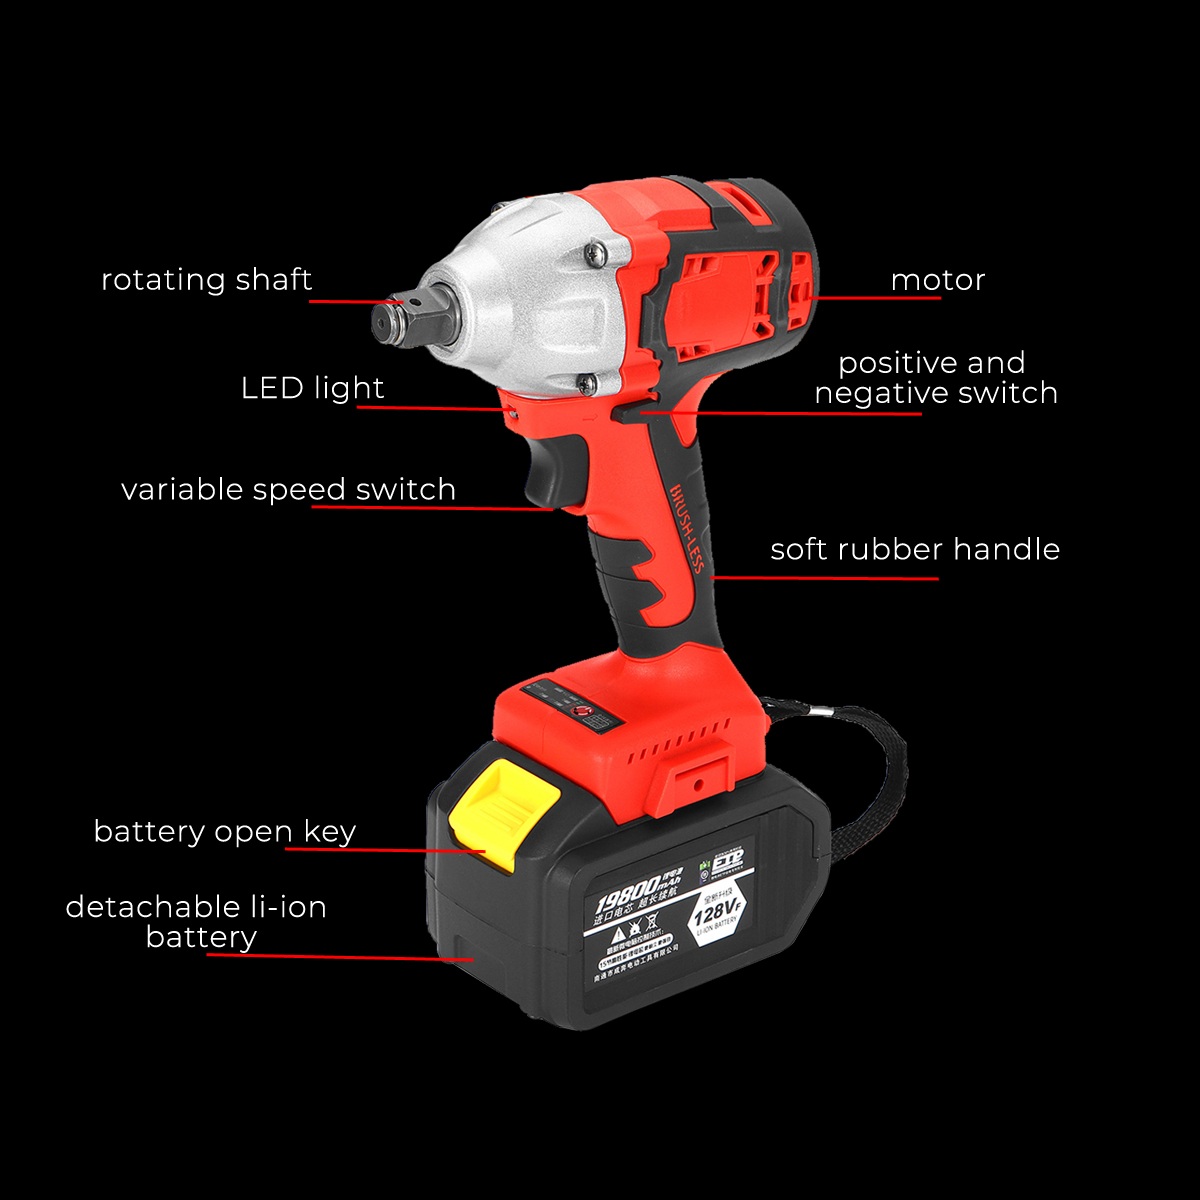 128VF-19800mah-Electric-Impact-Wrench-Brushless-Cordless-Drill-Tool-With-Battery-1685512-3